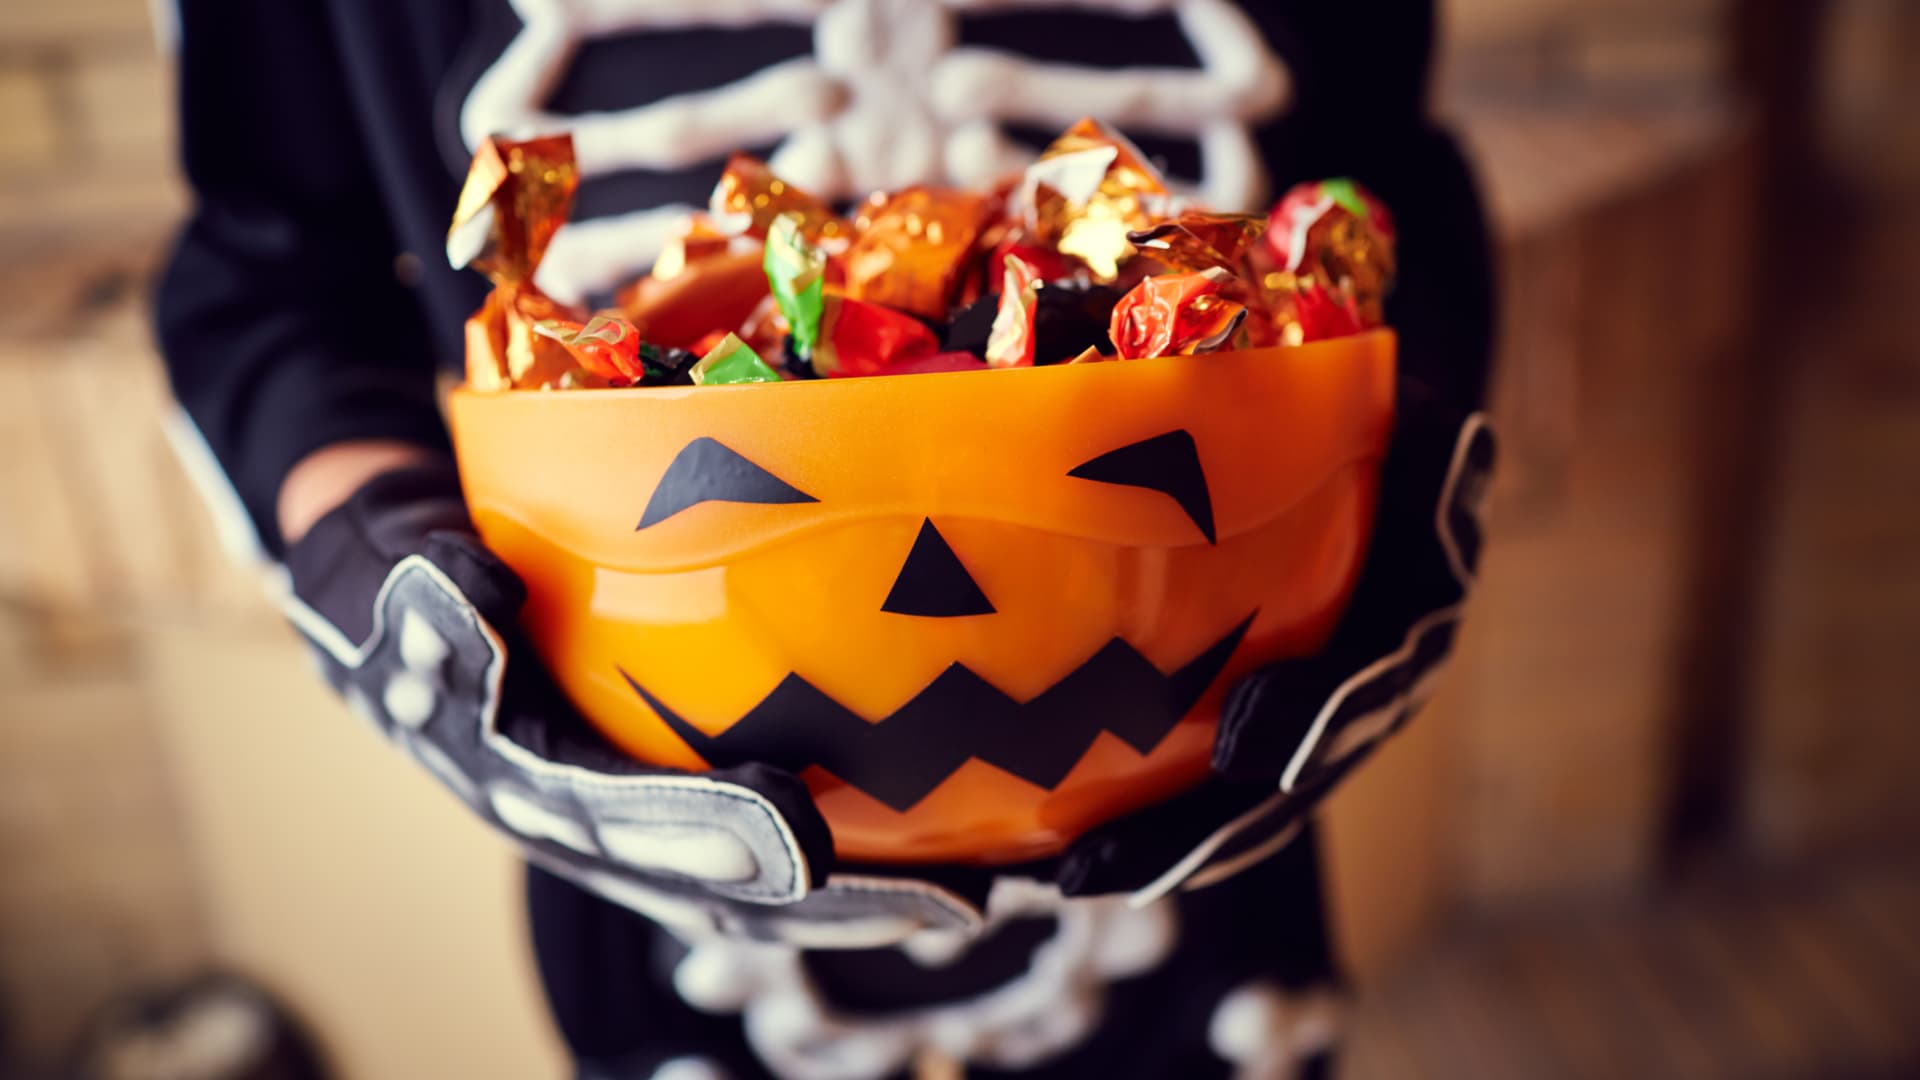 Halloween candy prices are skyrocketing—here's how much it'll cost this year